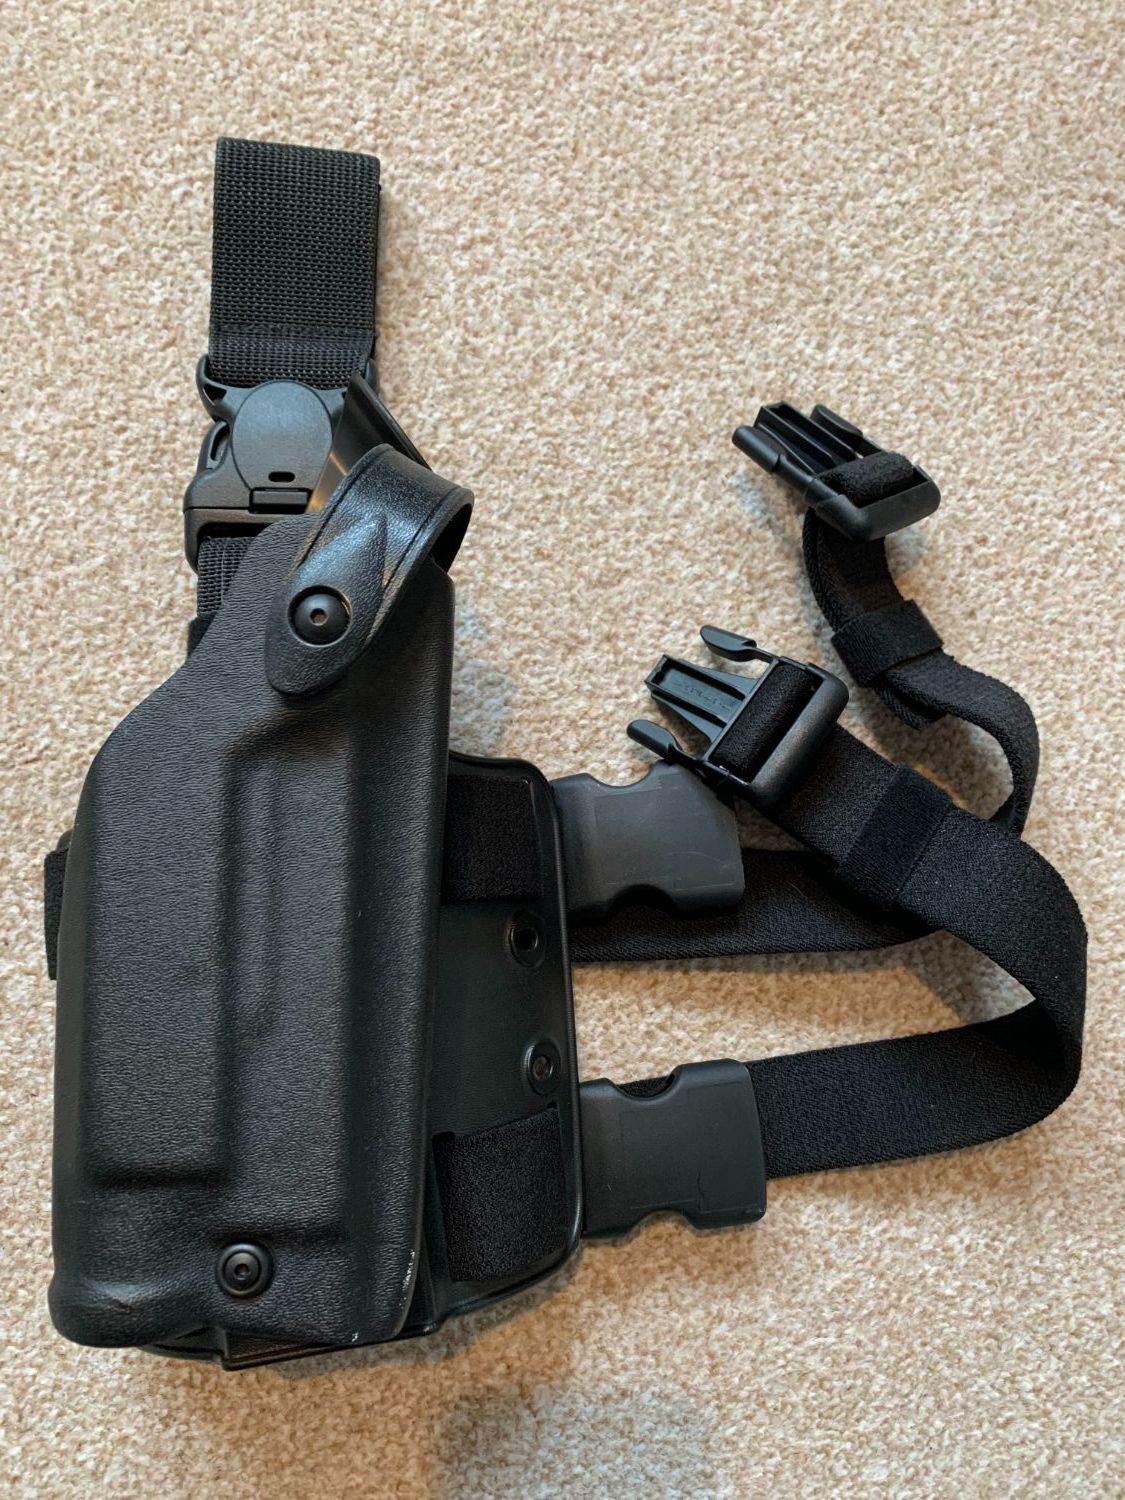 Safariland holster for G17+flashlight - Gear - Airsoft Forums UK